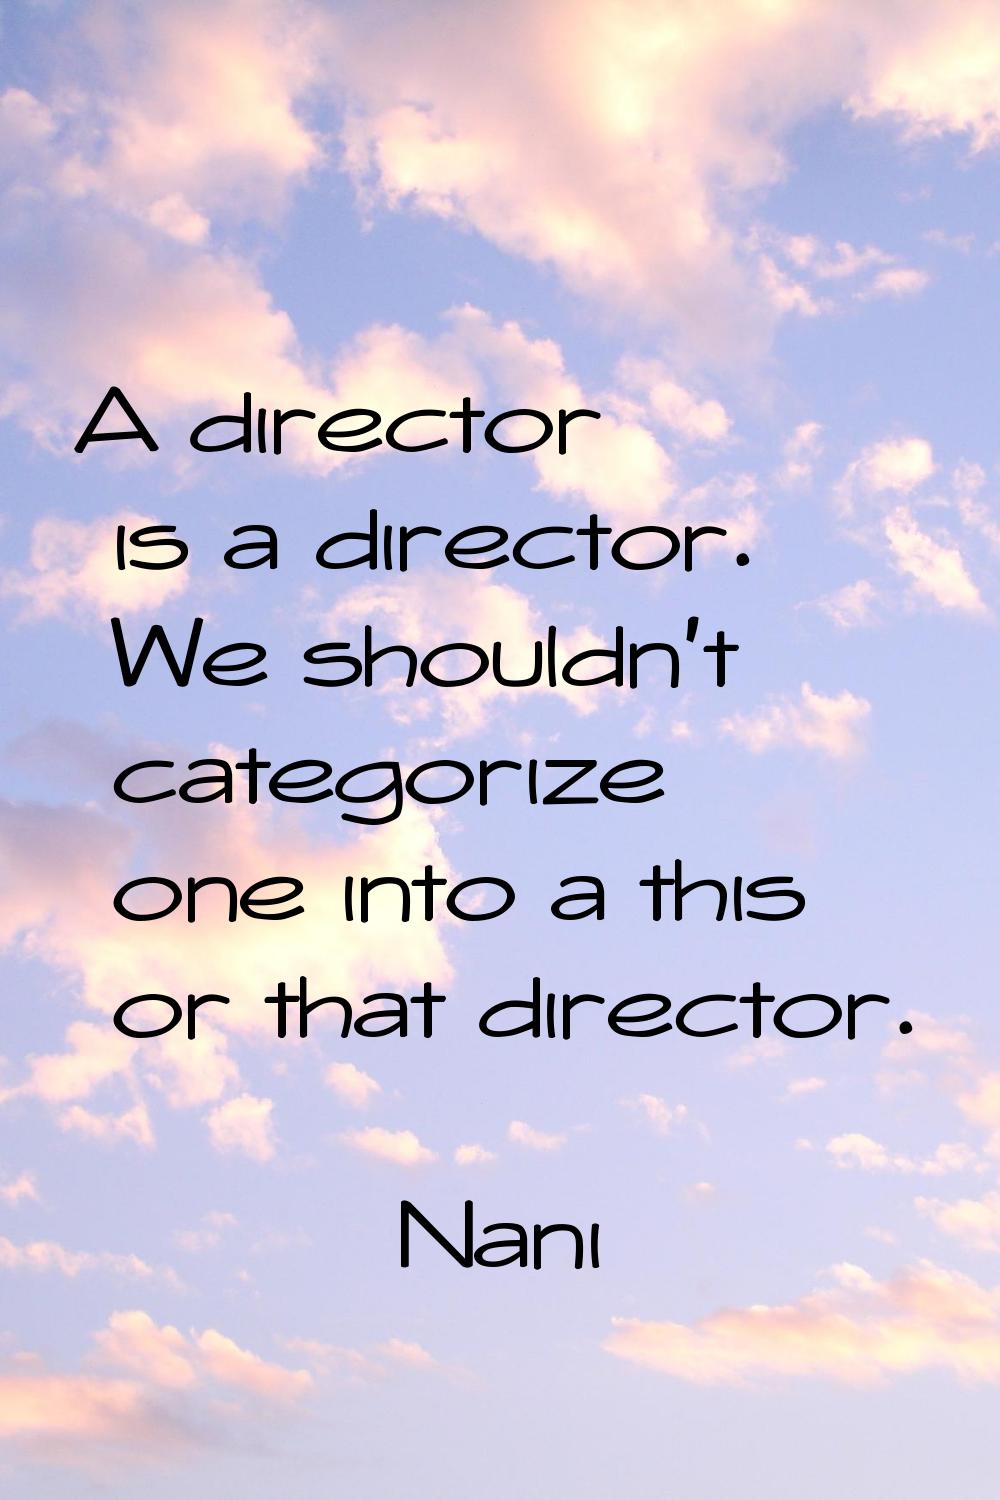 A director is a director. We shouldn't categorize one into a this or that director.